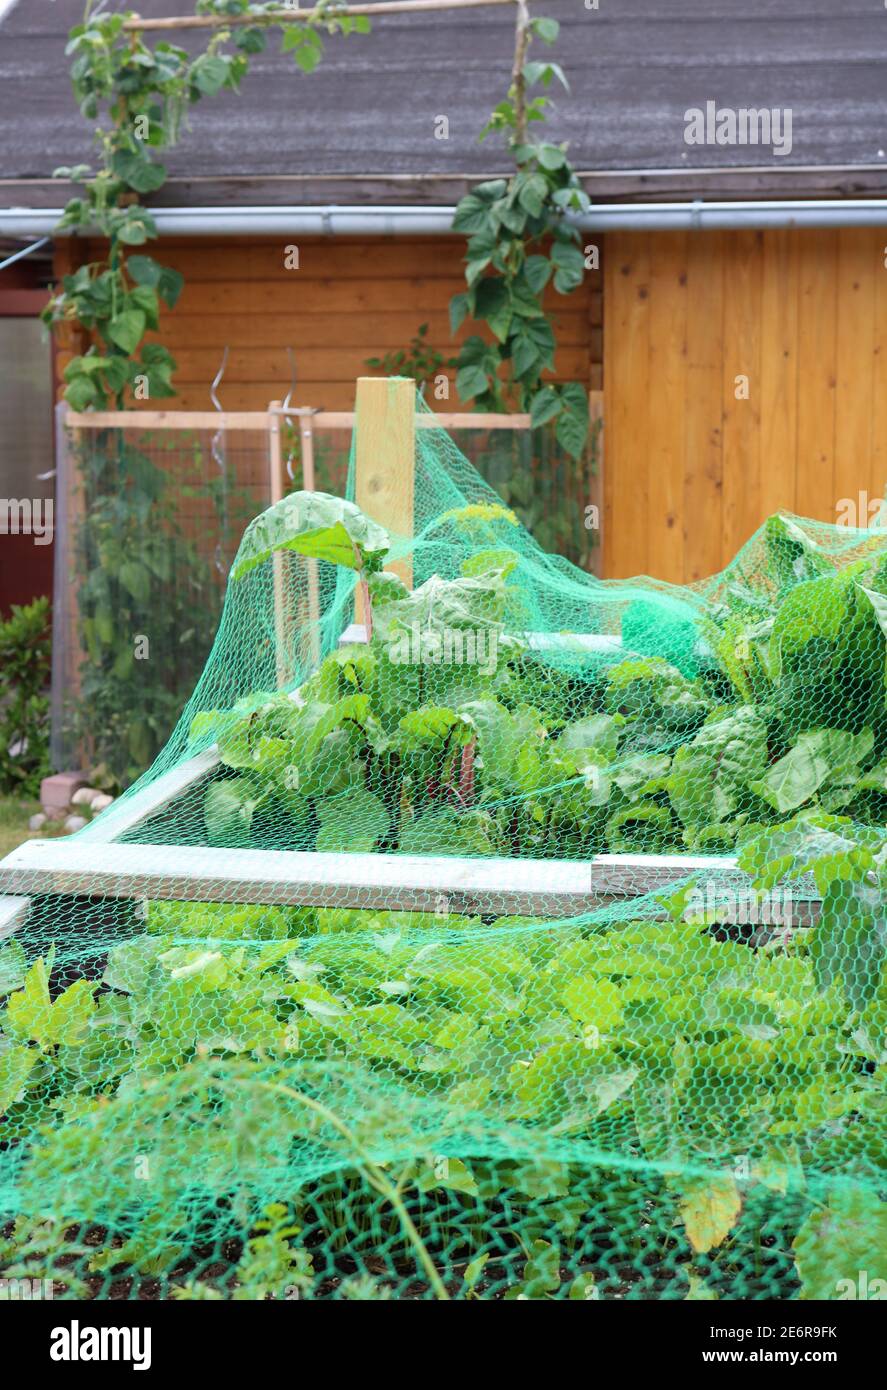 Raised herbs beds with fresh chard and various other vegetables, protected by a Bird and Insect Netting Stock Photo